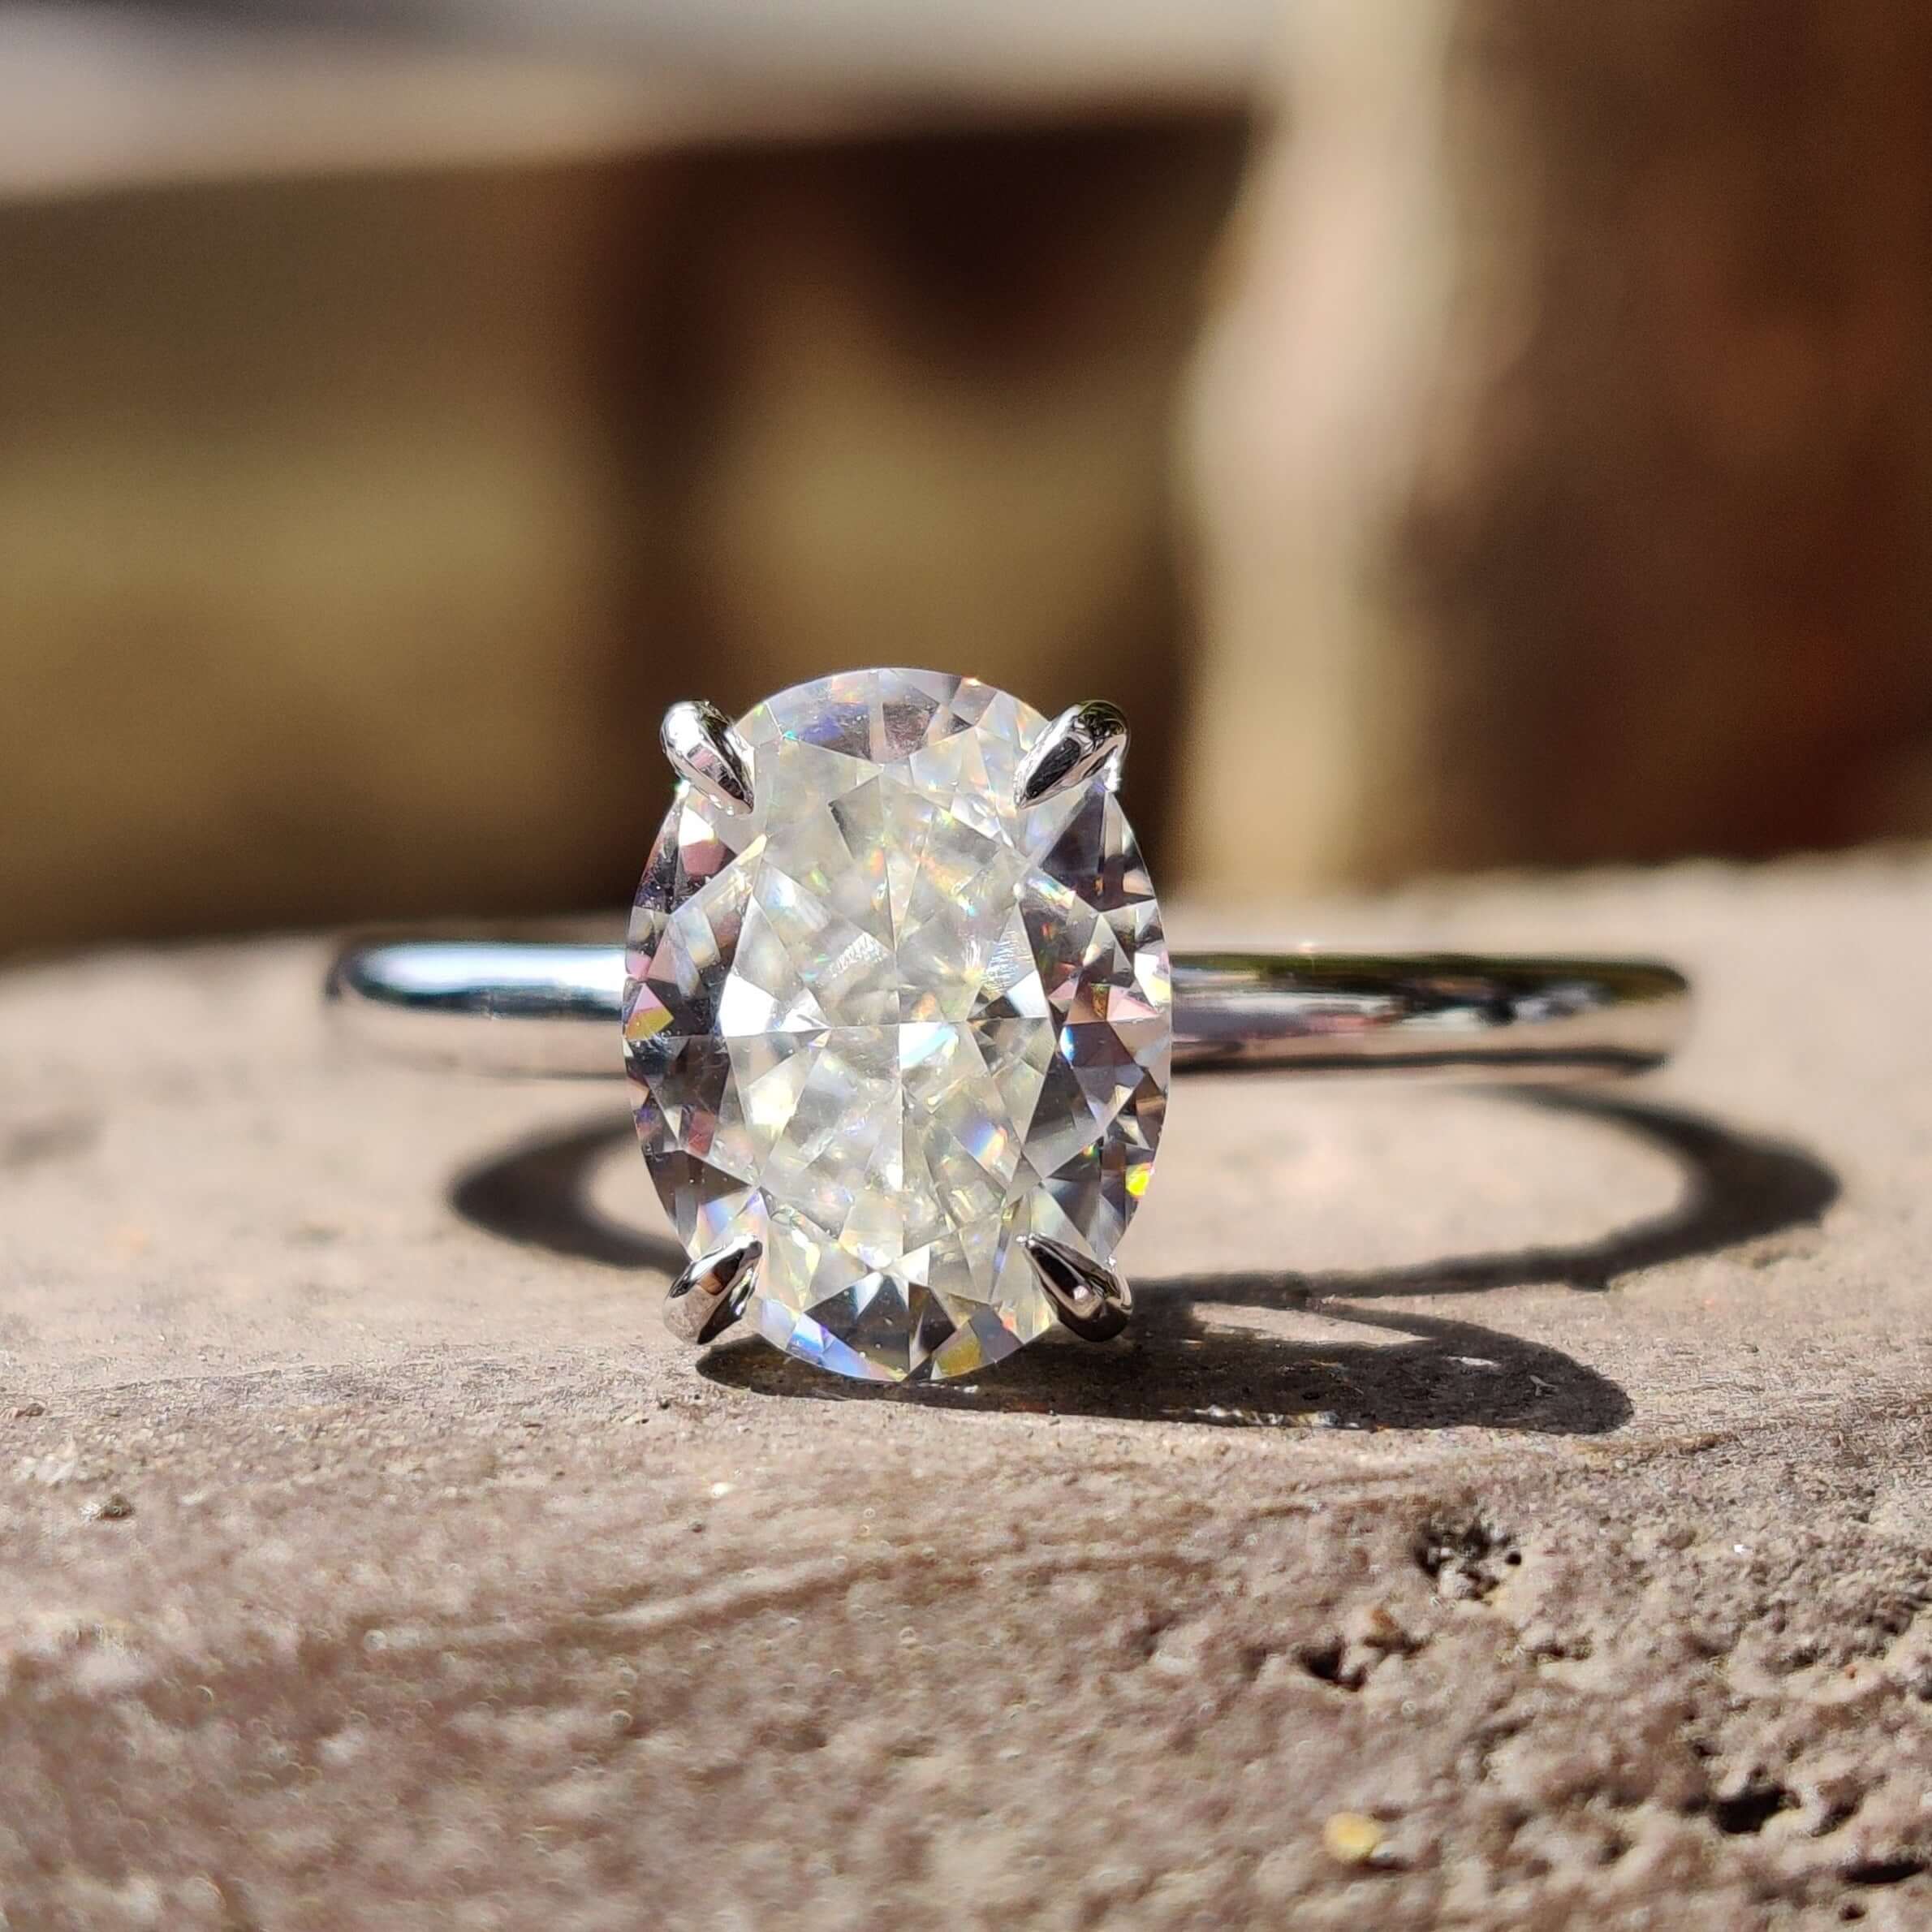 Crushed Ice Oval Cut Colorless Moissanite Engagement Ring